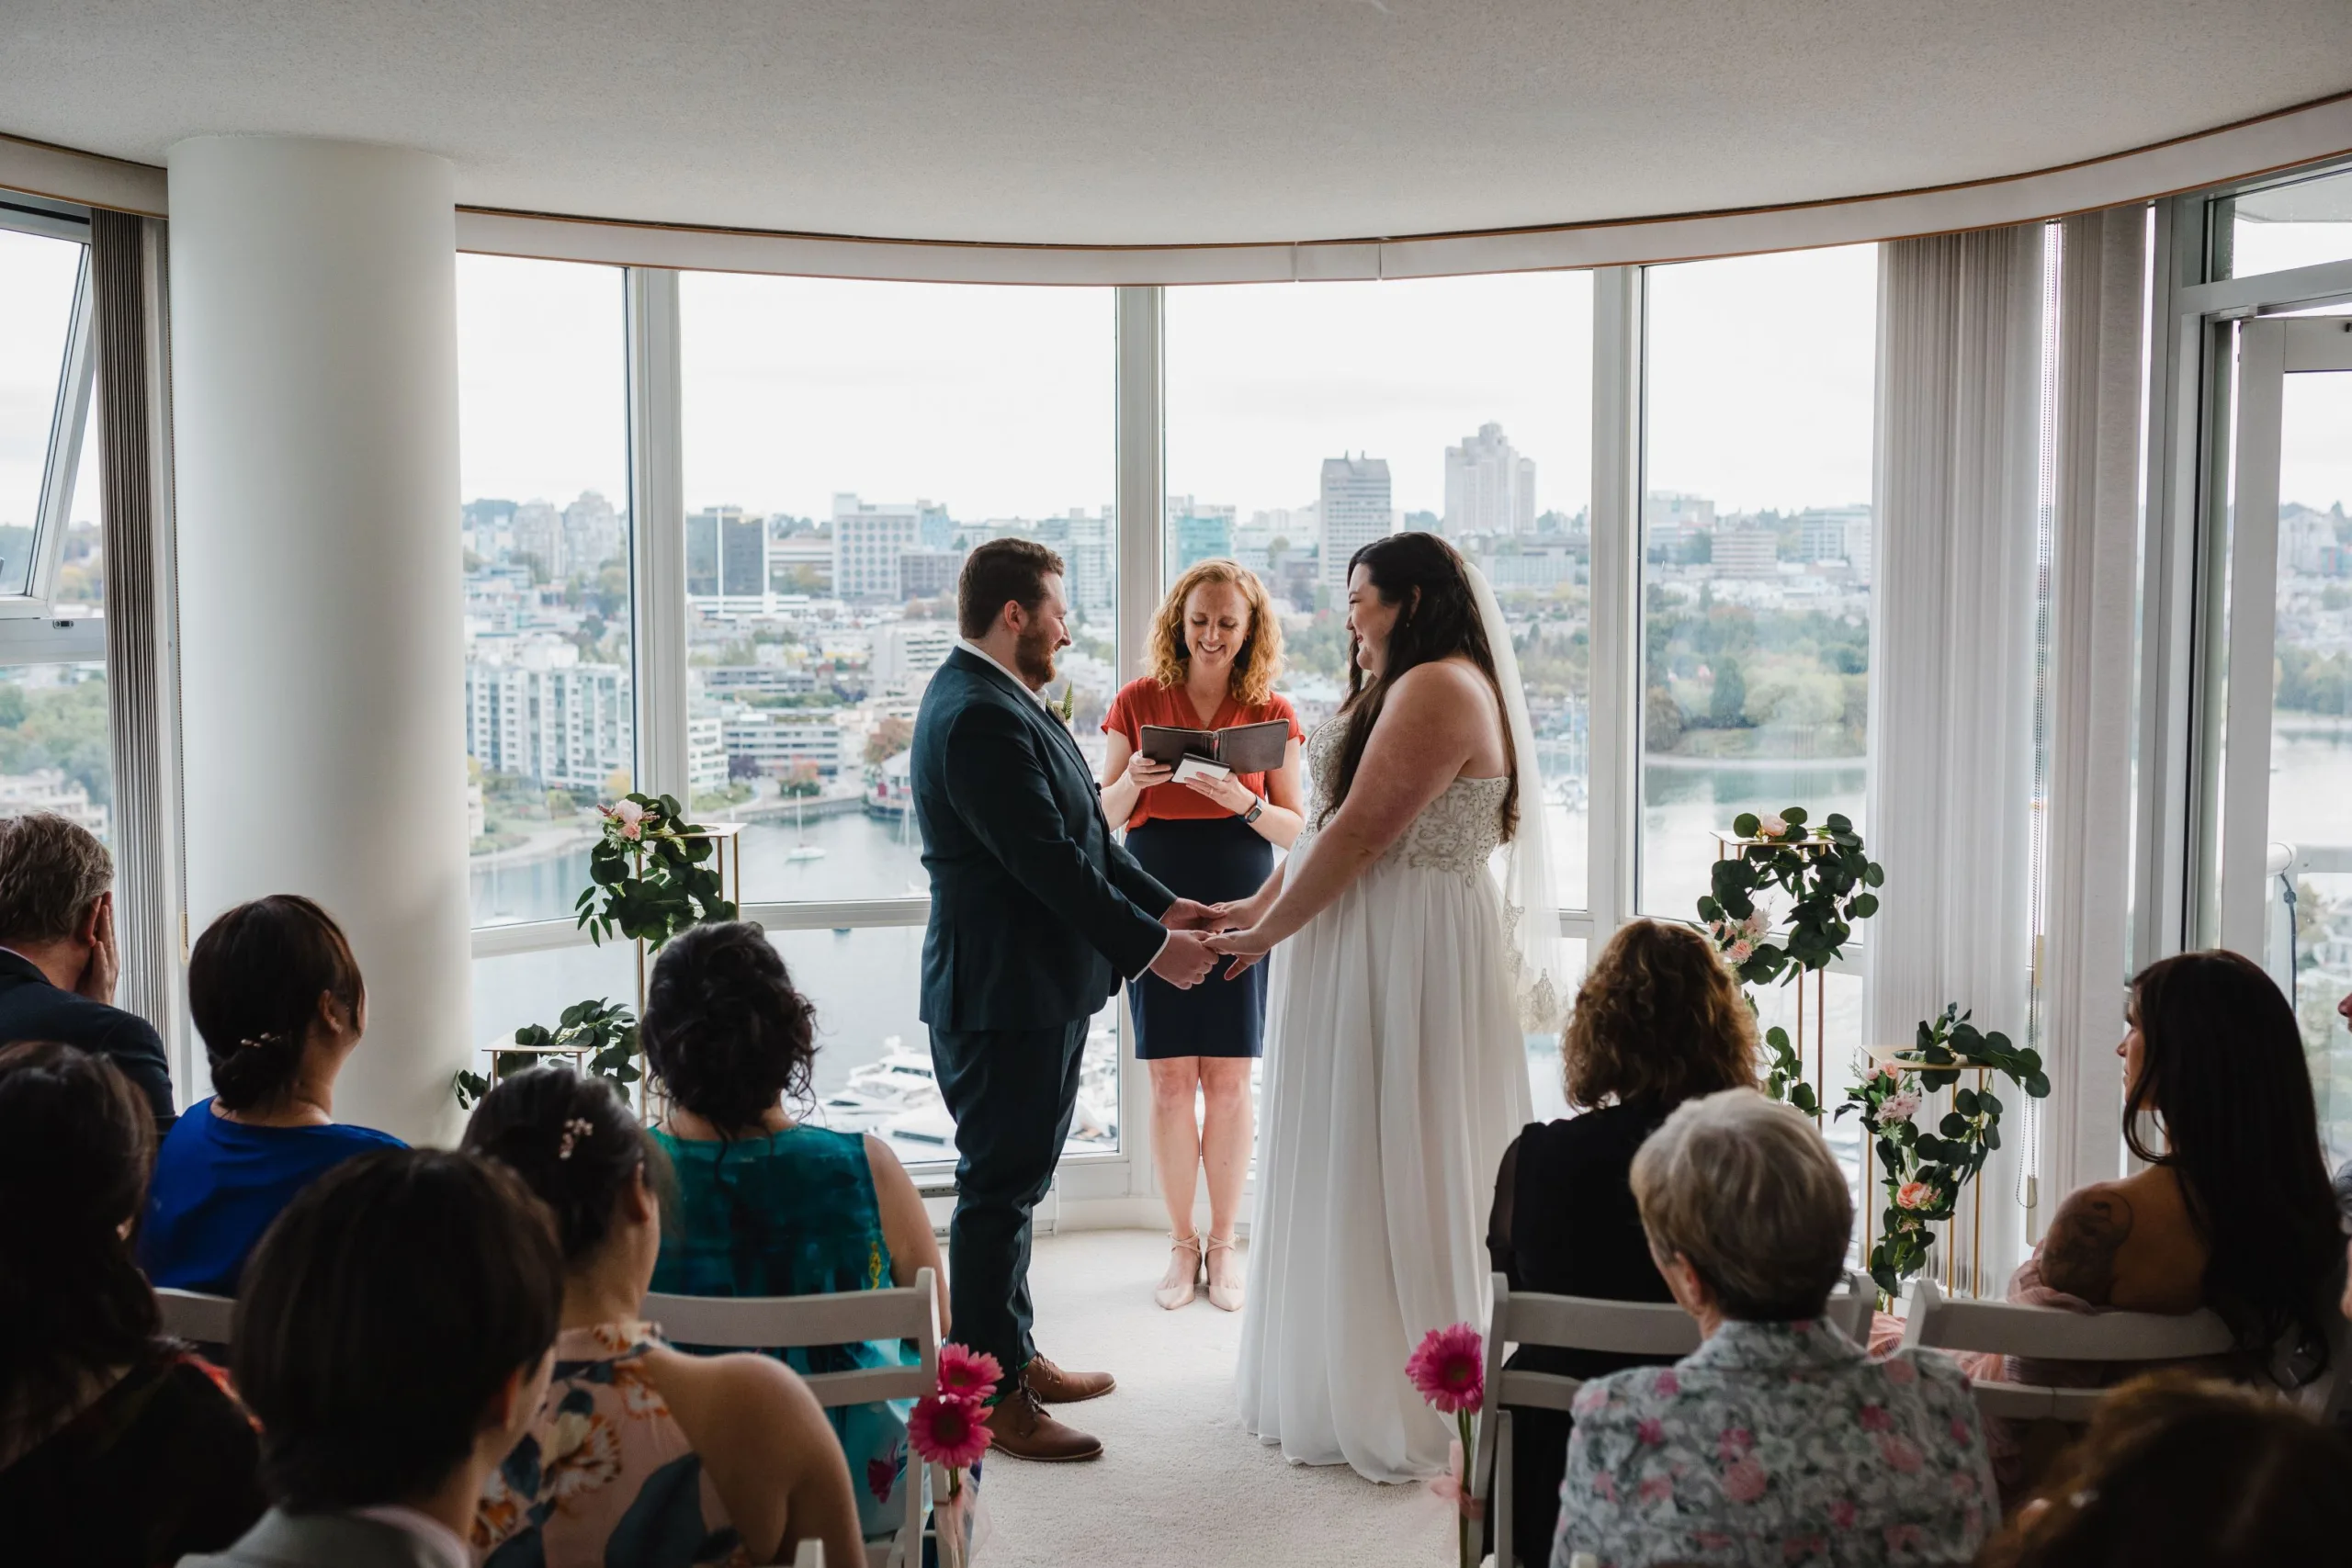 Wedding Officiant Jane marrying Riana and Colin in an elopement in Yaletown, Vancouver